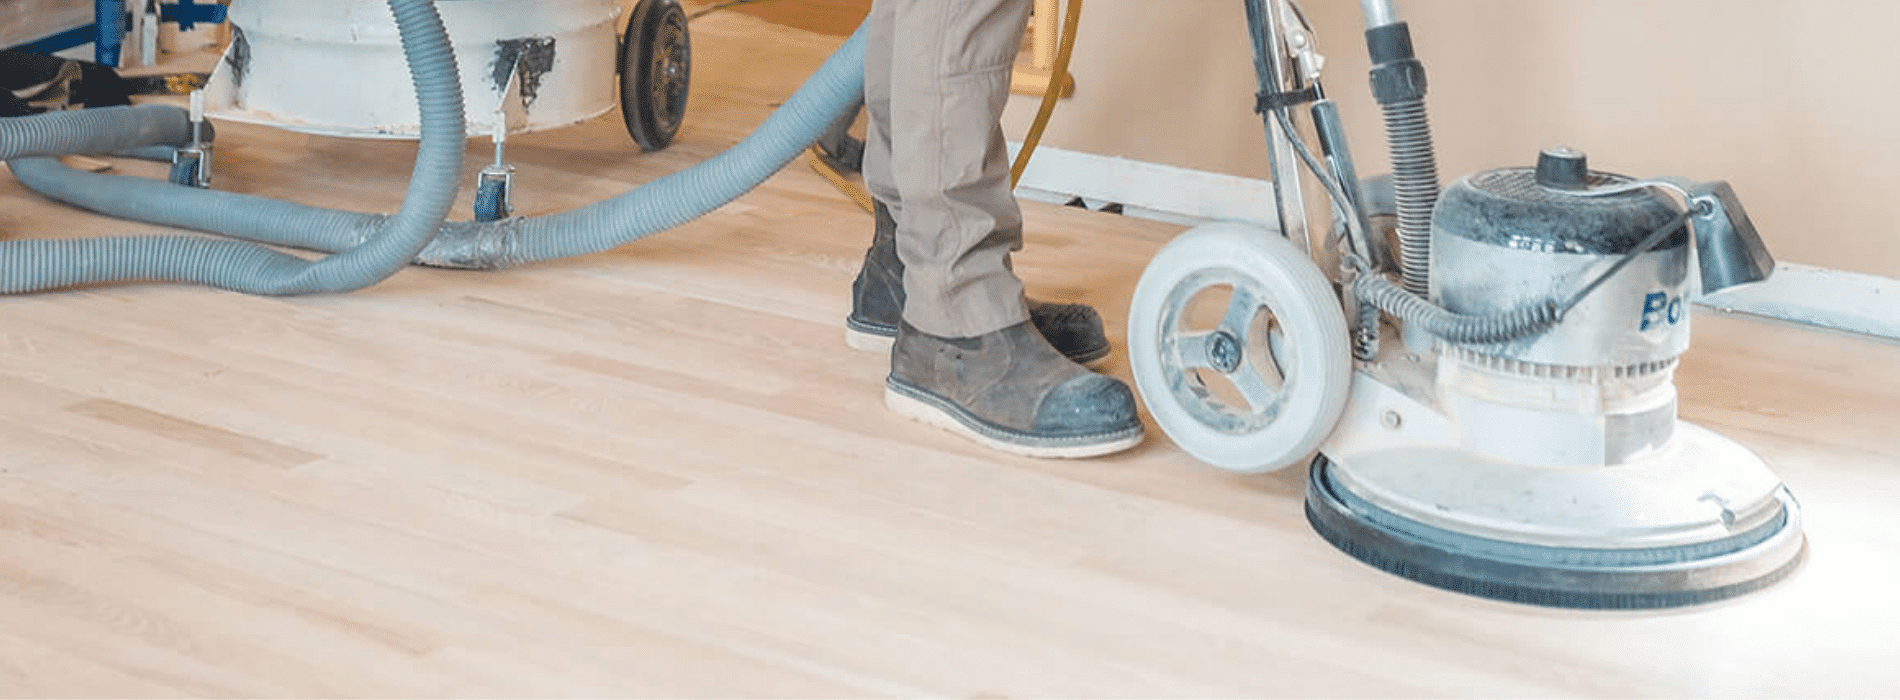 In Cockfosters, EN4, Mr Sander® are using the Bona FlexiSand 1.9, a powerful buffer sander with Ø 407 mm dimensions, 1.9 kW effect, and 230V voltage. It operates at 50 Hz/60 Hz frequency and is connected to a dust extraction system with a HEPA filter for optimal cleanliness and efficiency during the sanding process of a parquet floor. 